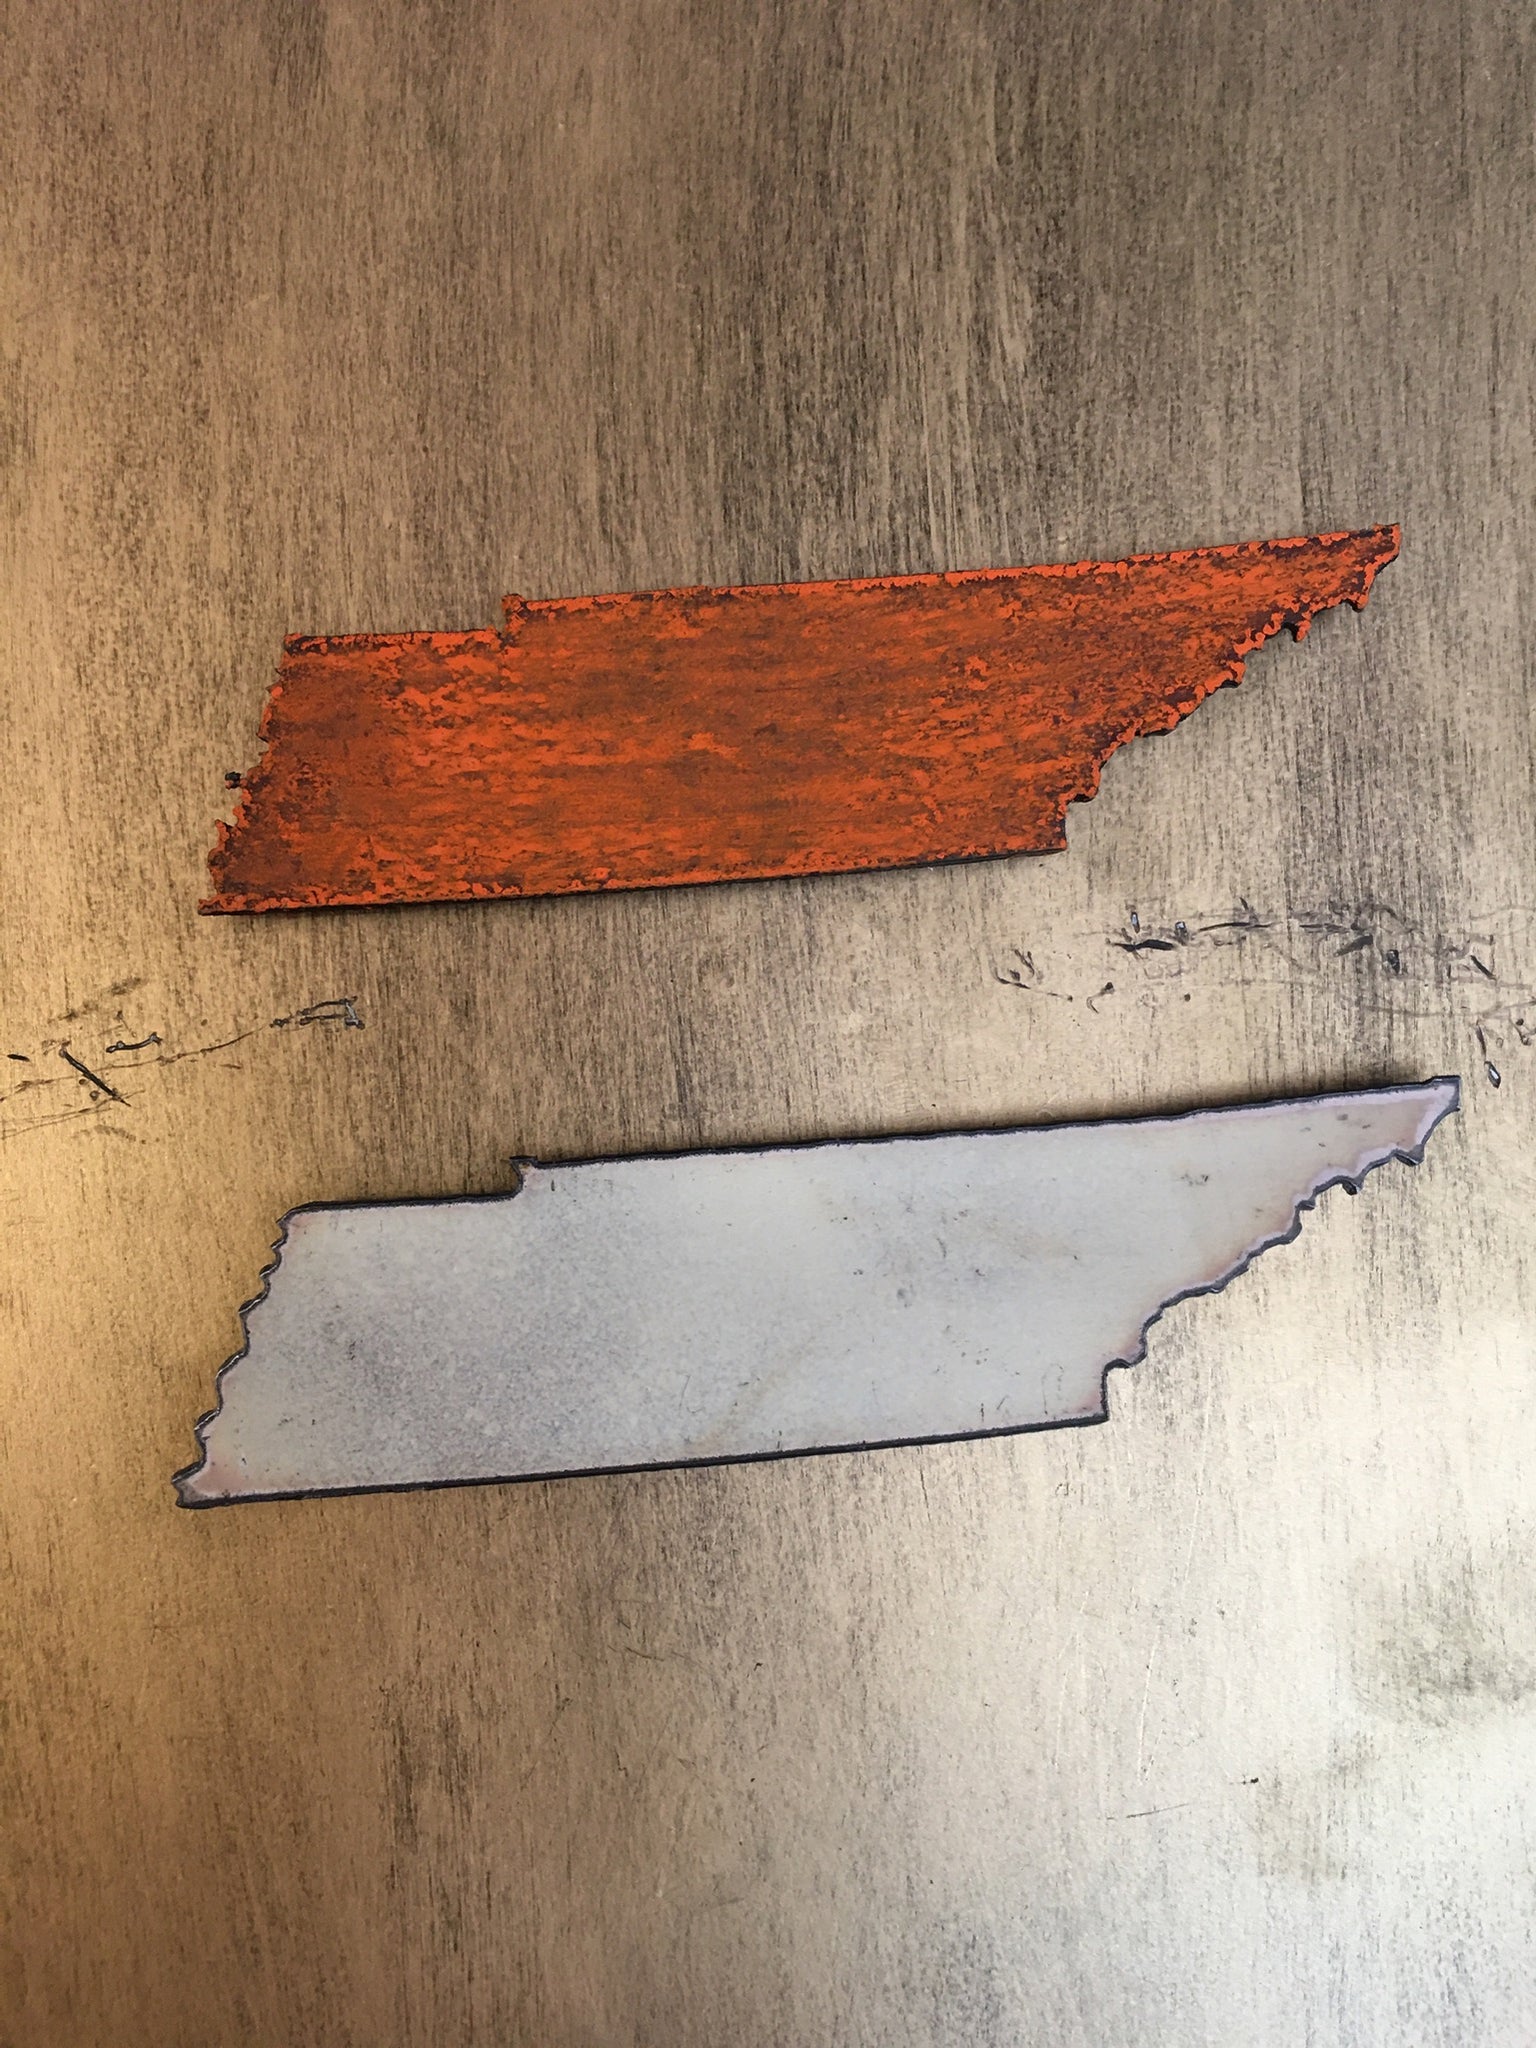 Tennessee Magnet